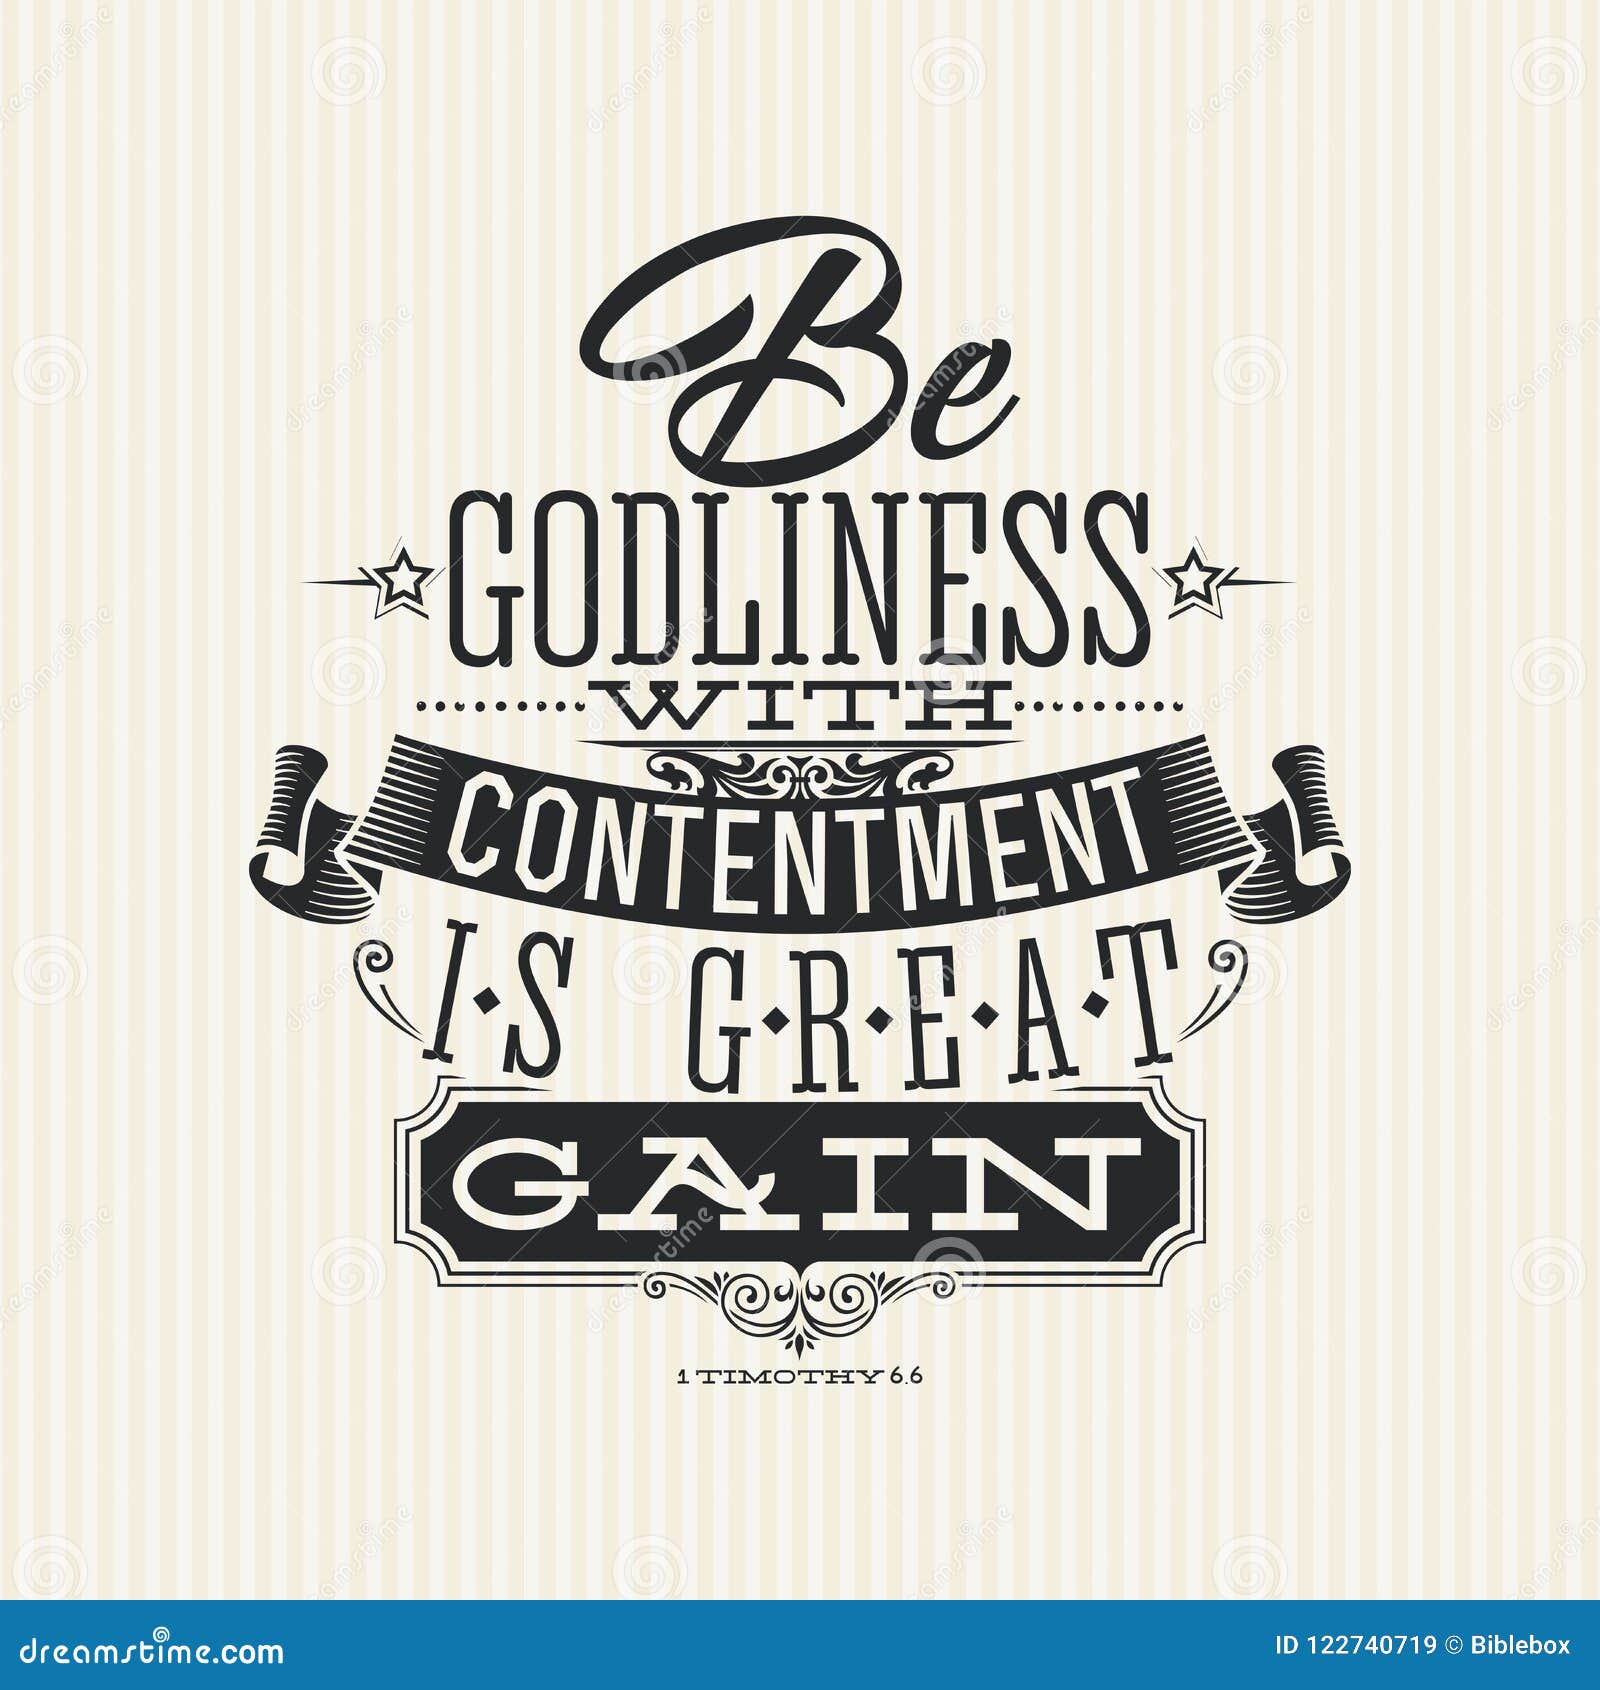 christian print. be godliness with contentment is great gain.